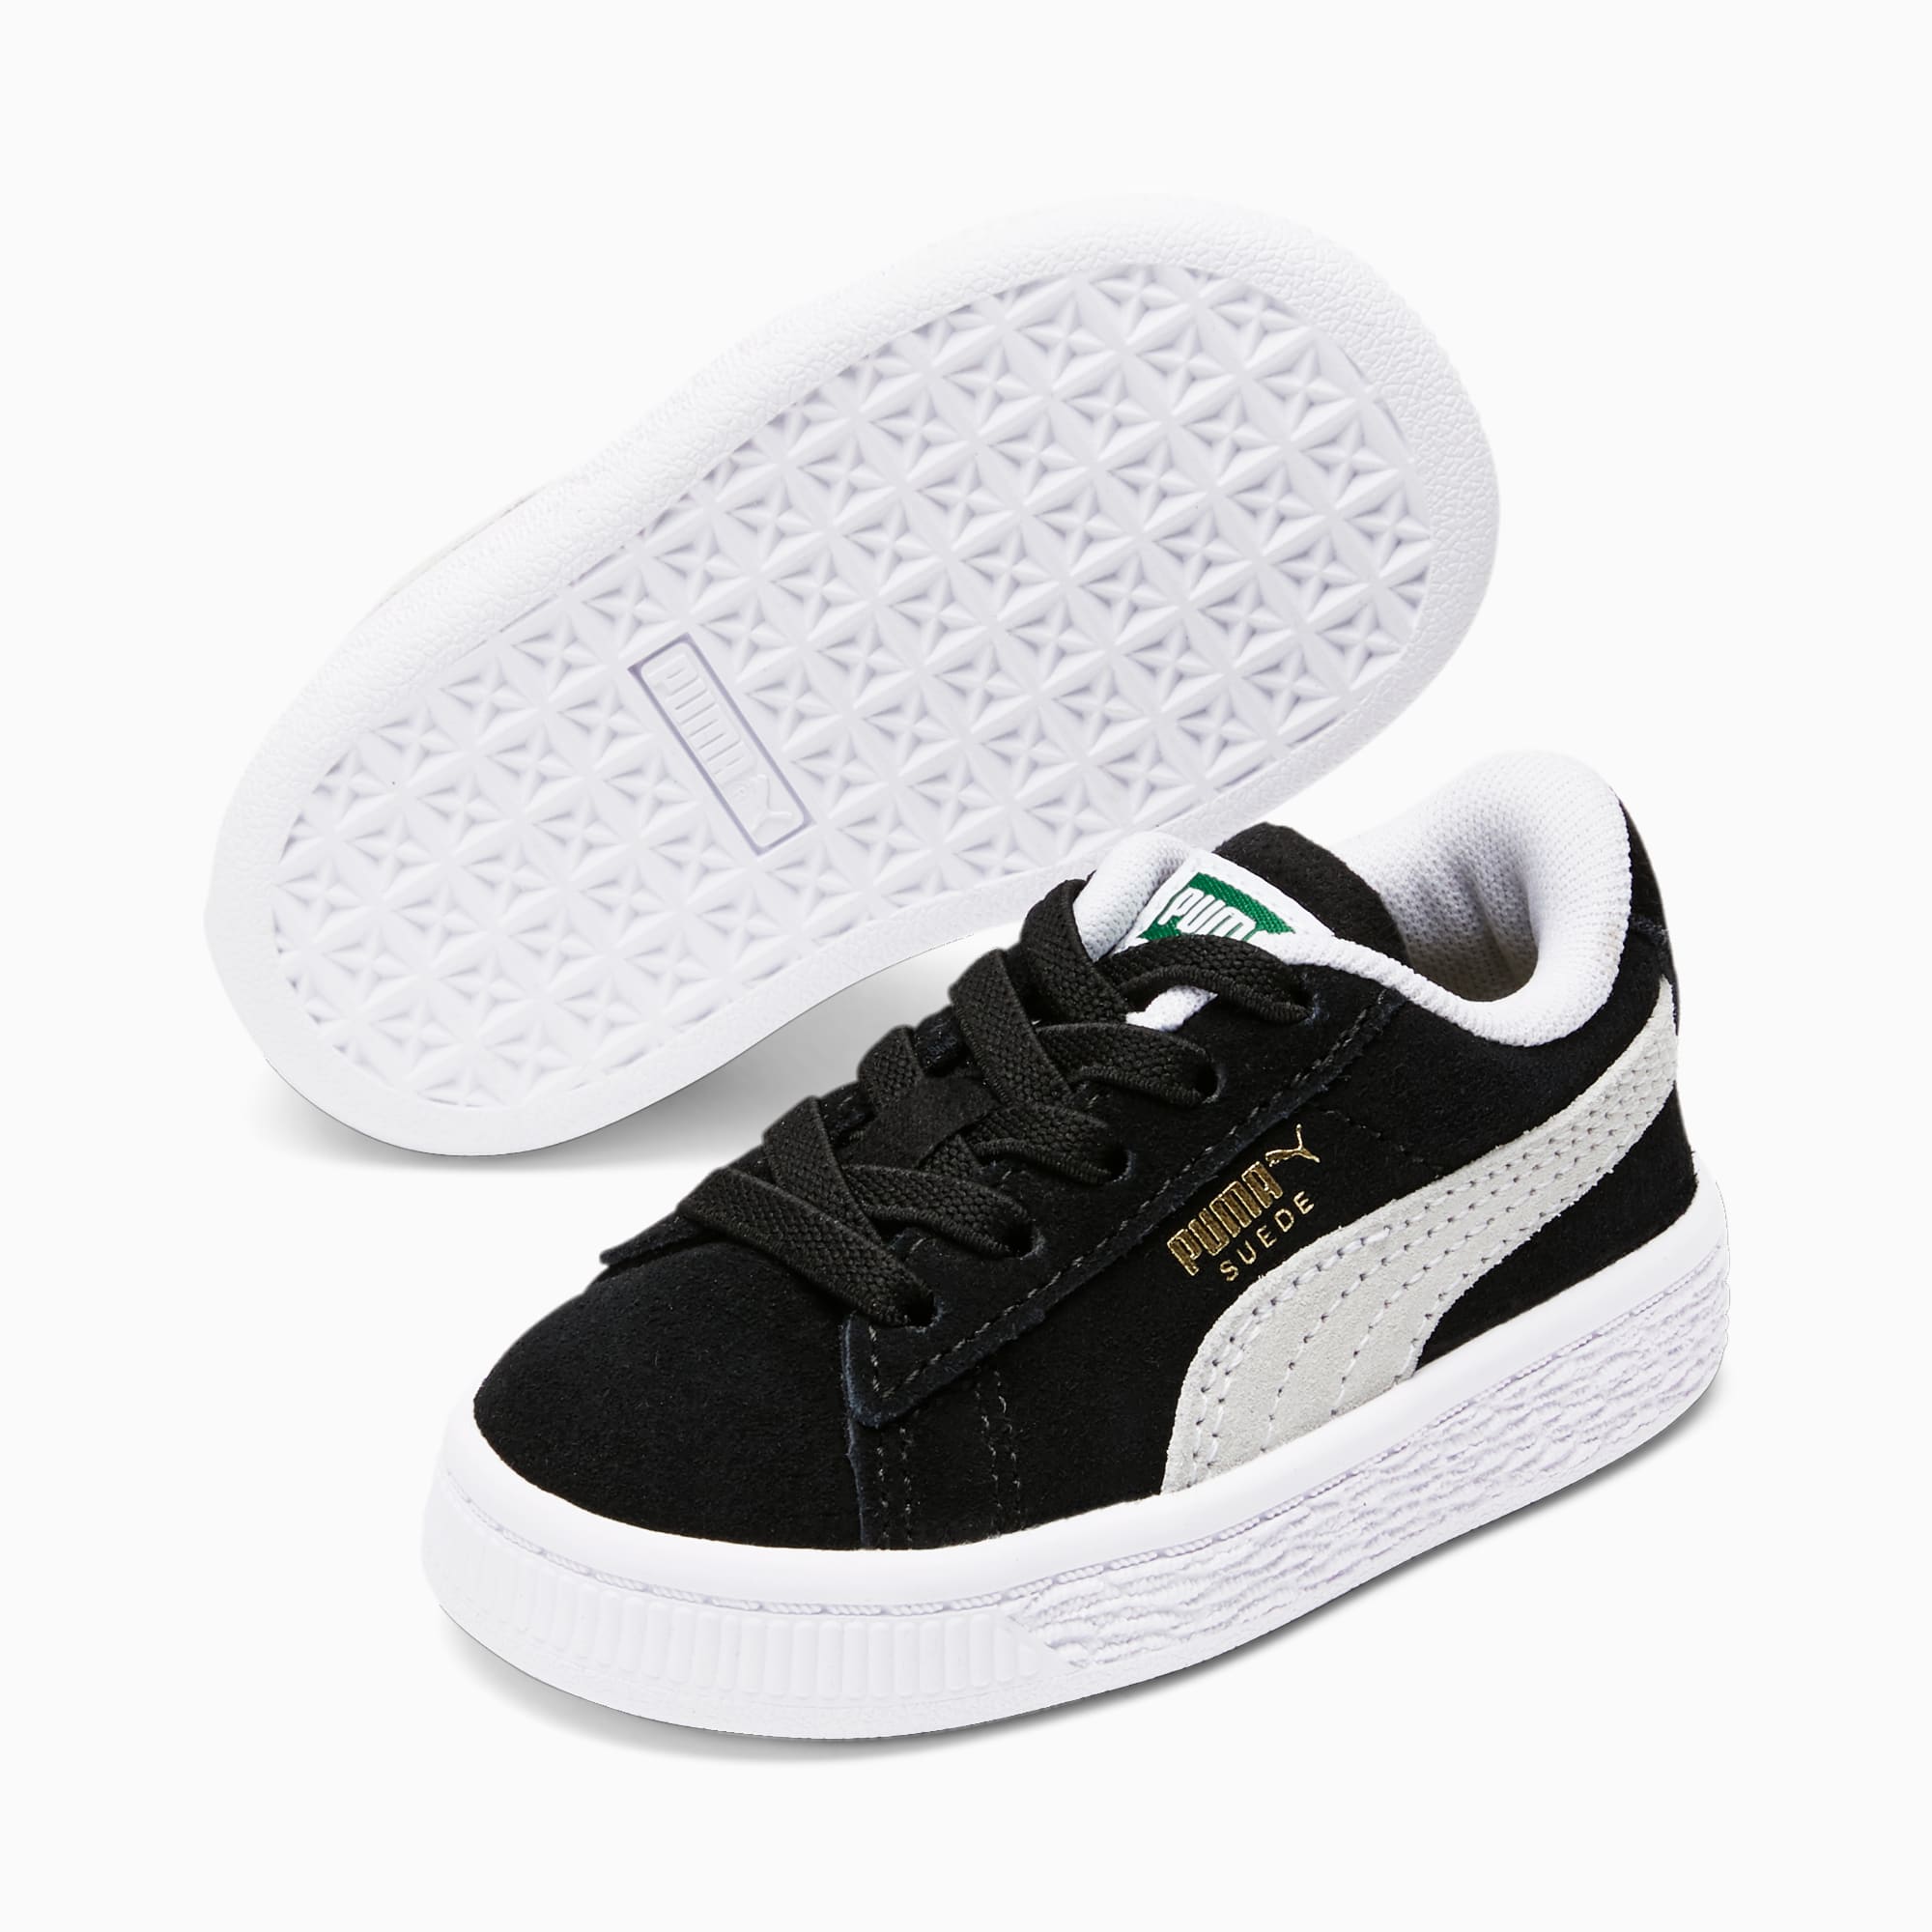 PUMA Suede Classic XXI sneakers in dark gray with white detail